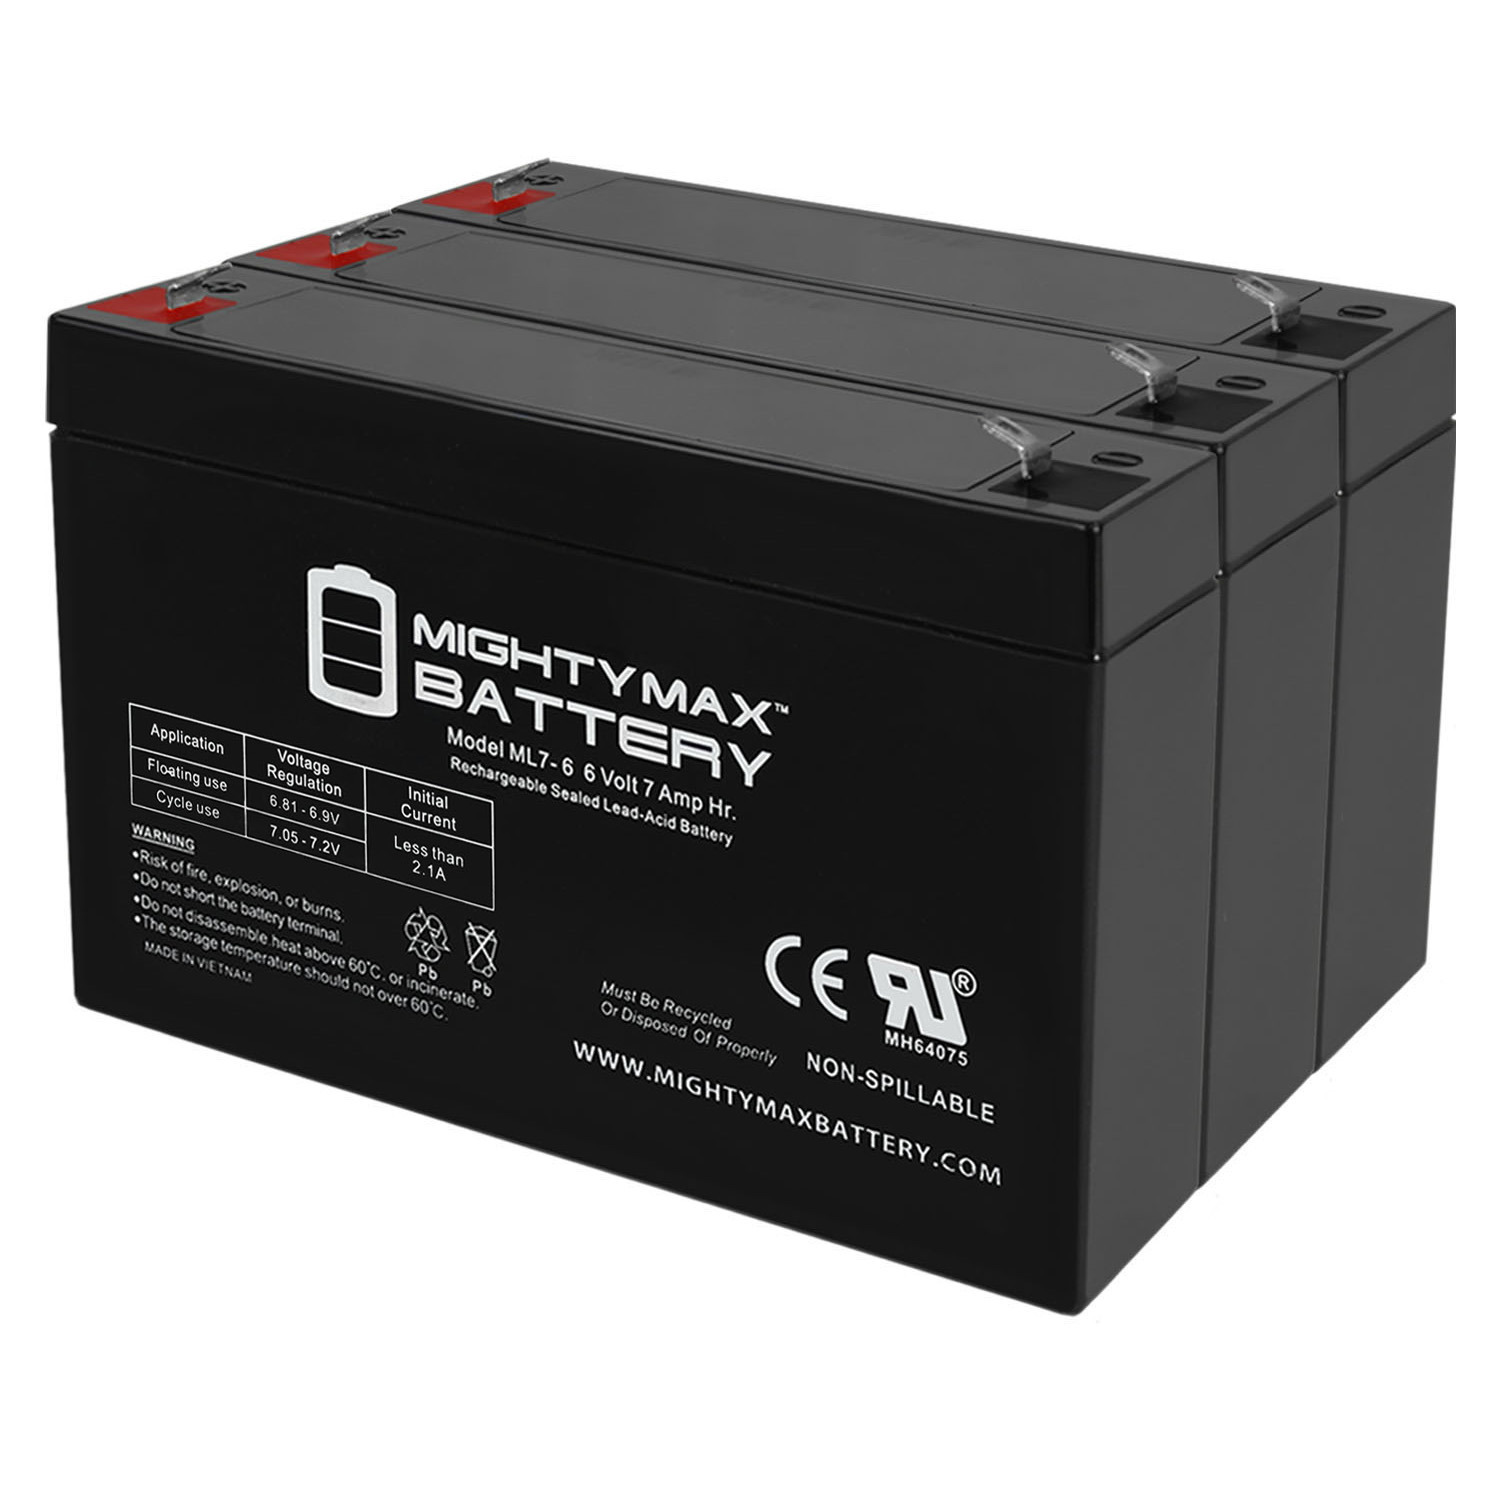 6V 7Ah SLA Replacement Battery for Sure-Lites RD1 - 3 Pack